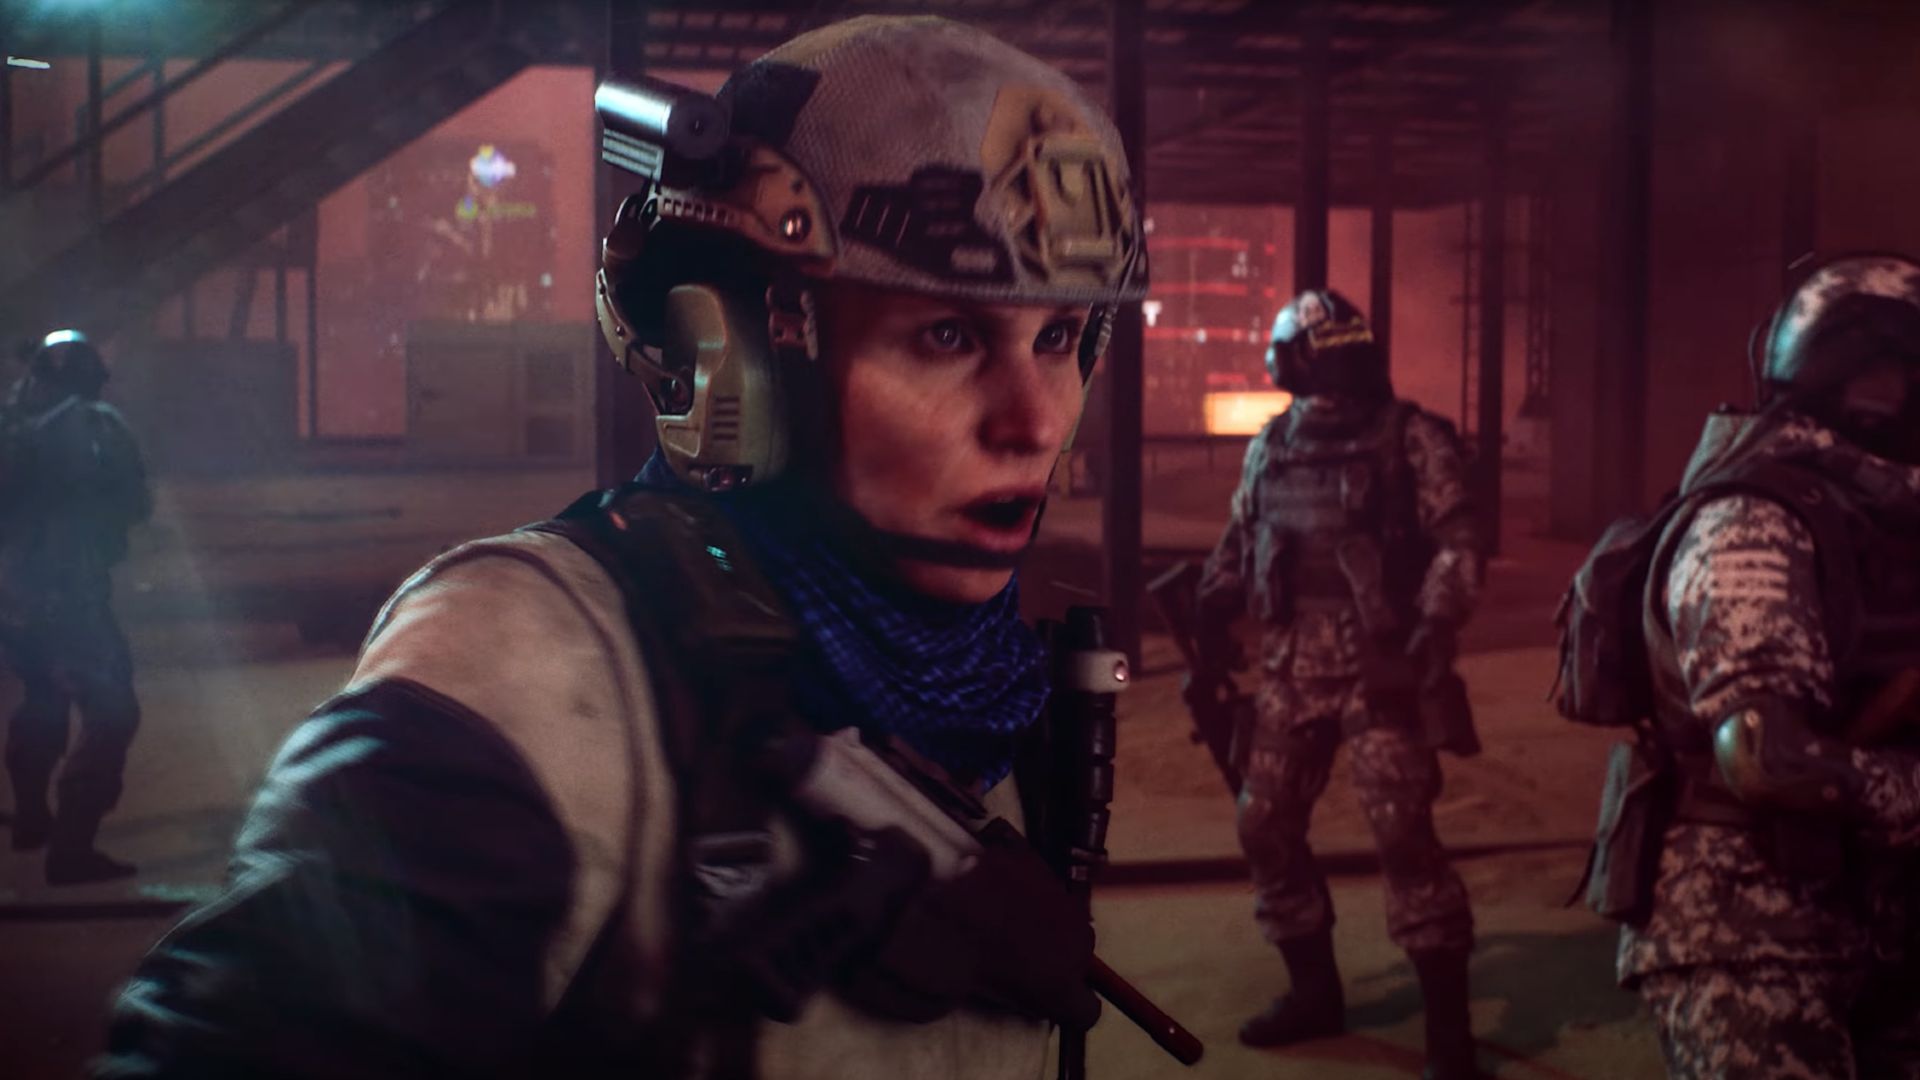 Battlefield 4 Used to Recreate Battlefield 2042's Chaotic Reveal Trailer